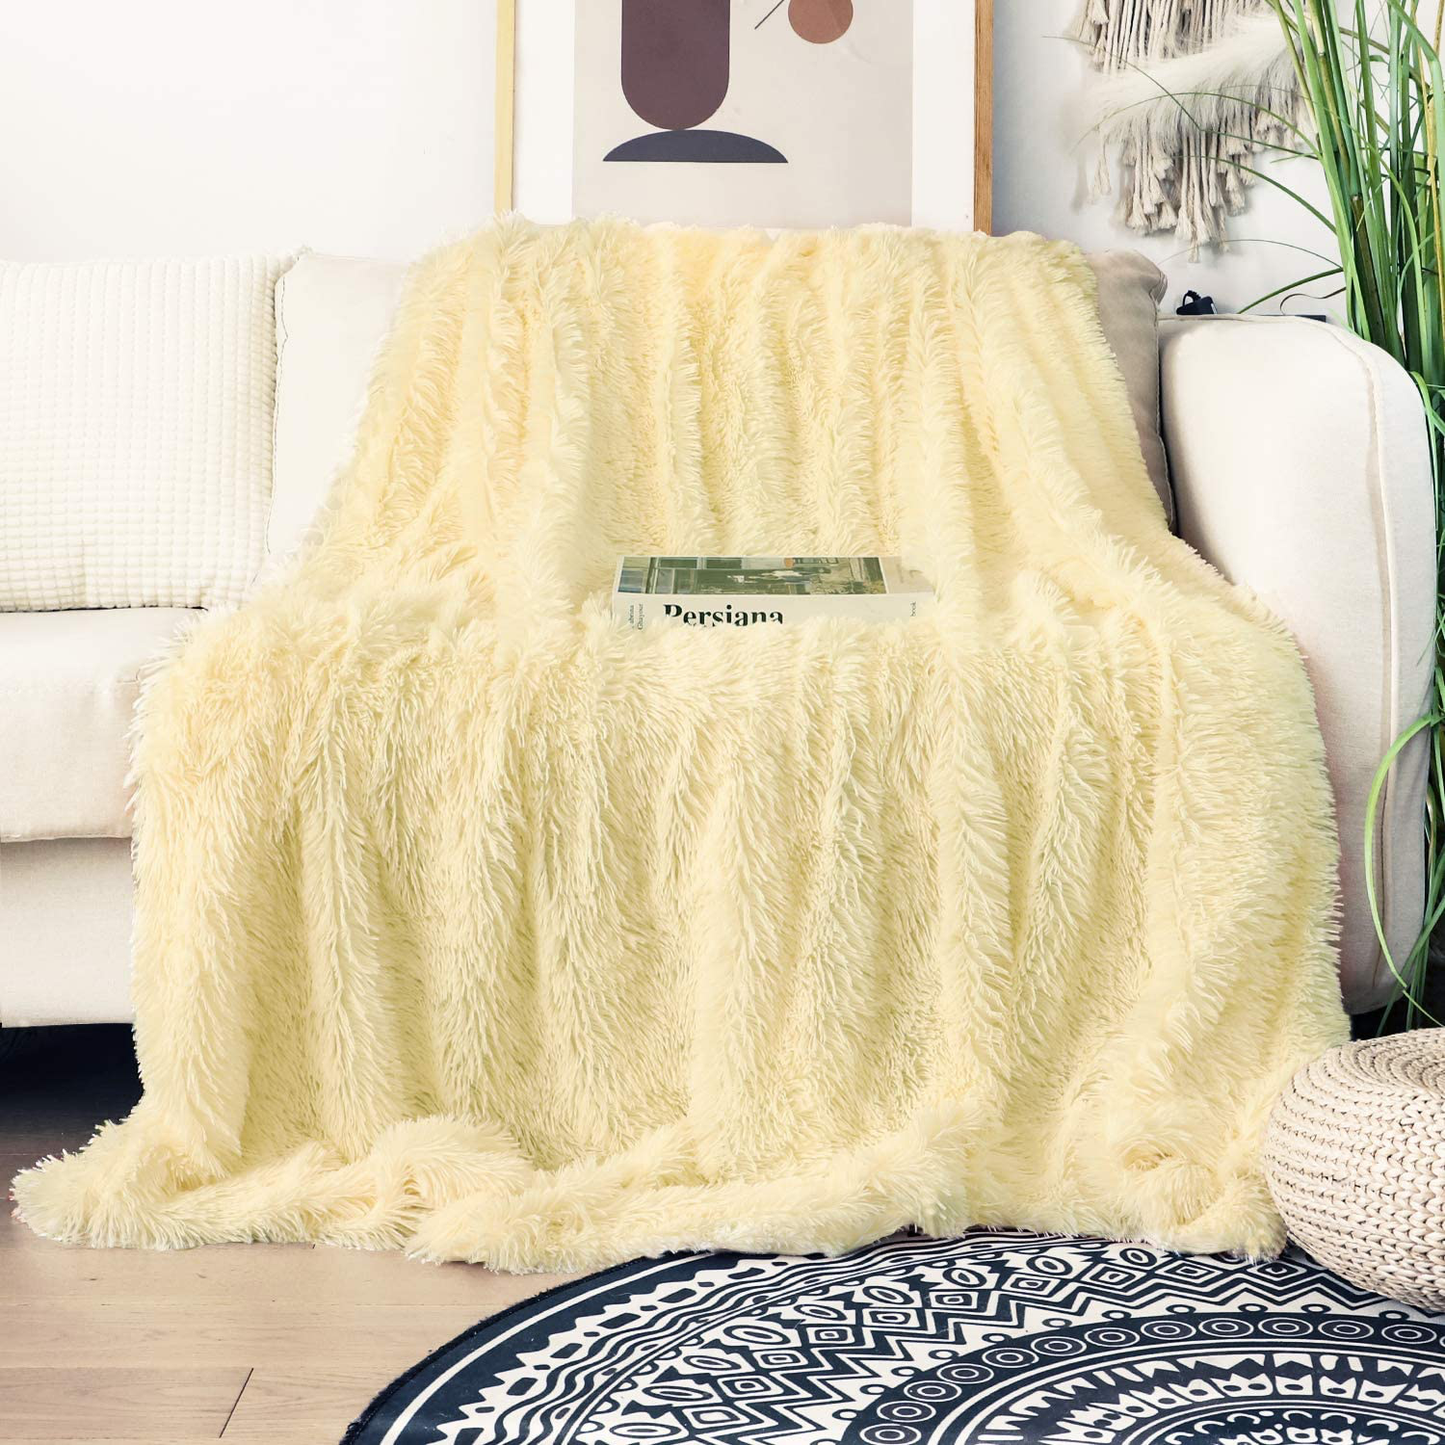 Decorative Extra Soft Faux Fur Throw Blanket 50" x 60",Solid Reversible Fuzzy Lightweight Long Hair Shaggy Blanket,Fluffy Cozy Plush Fleece Comfy Microfiber Fur Blanket for Couch Sofa Bed,Pure White